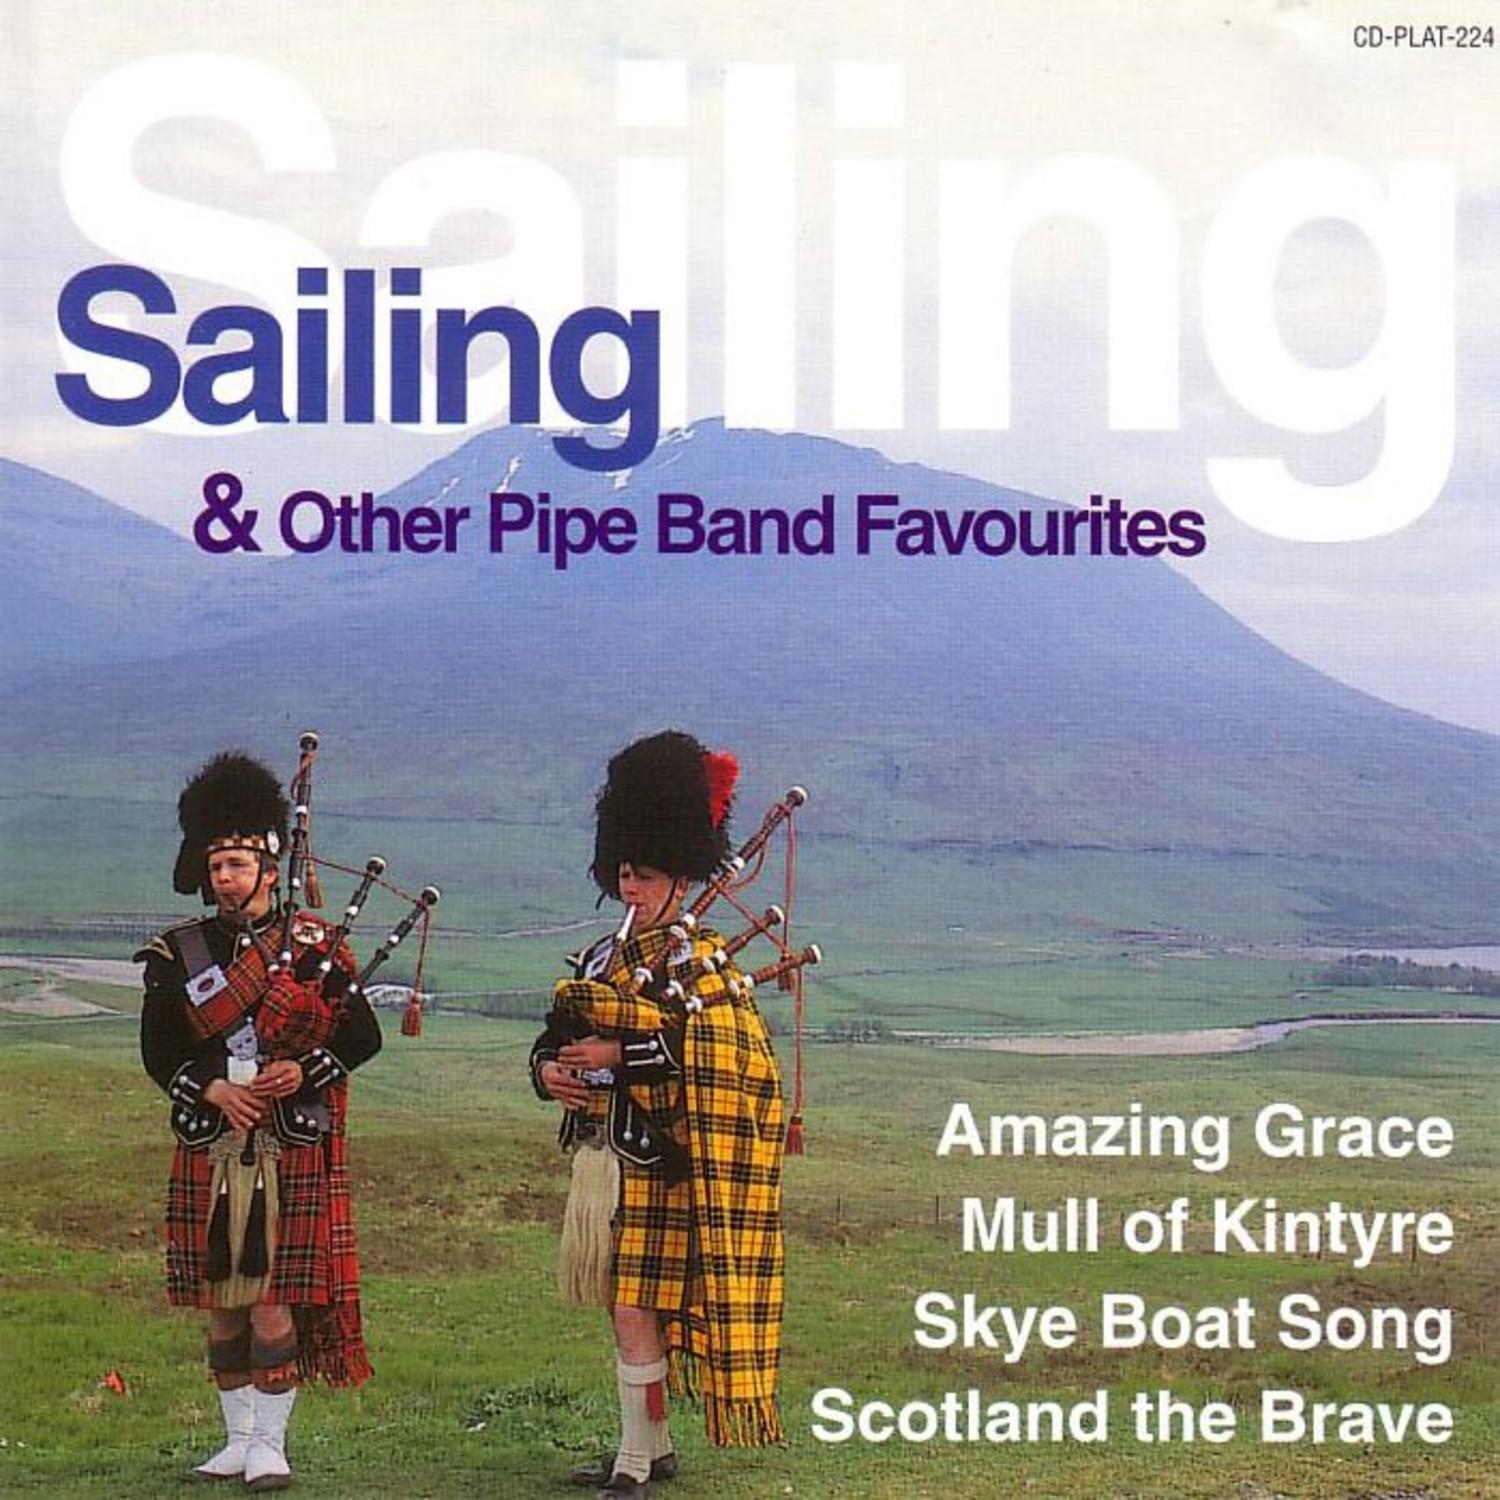 Sailing & Other Pipe Band Favourites